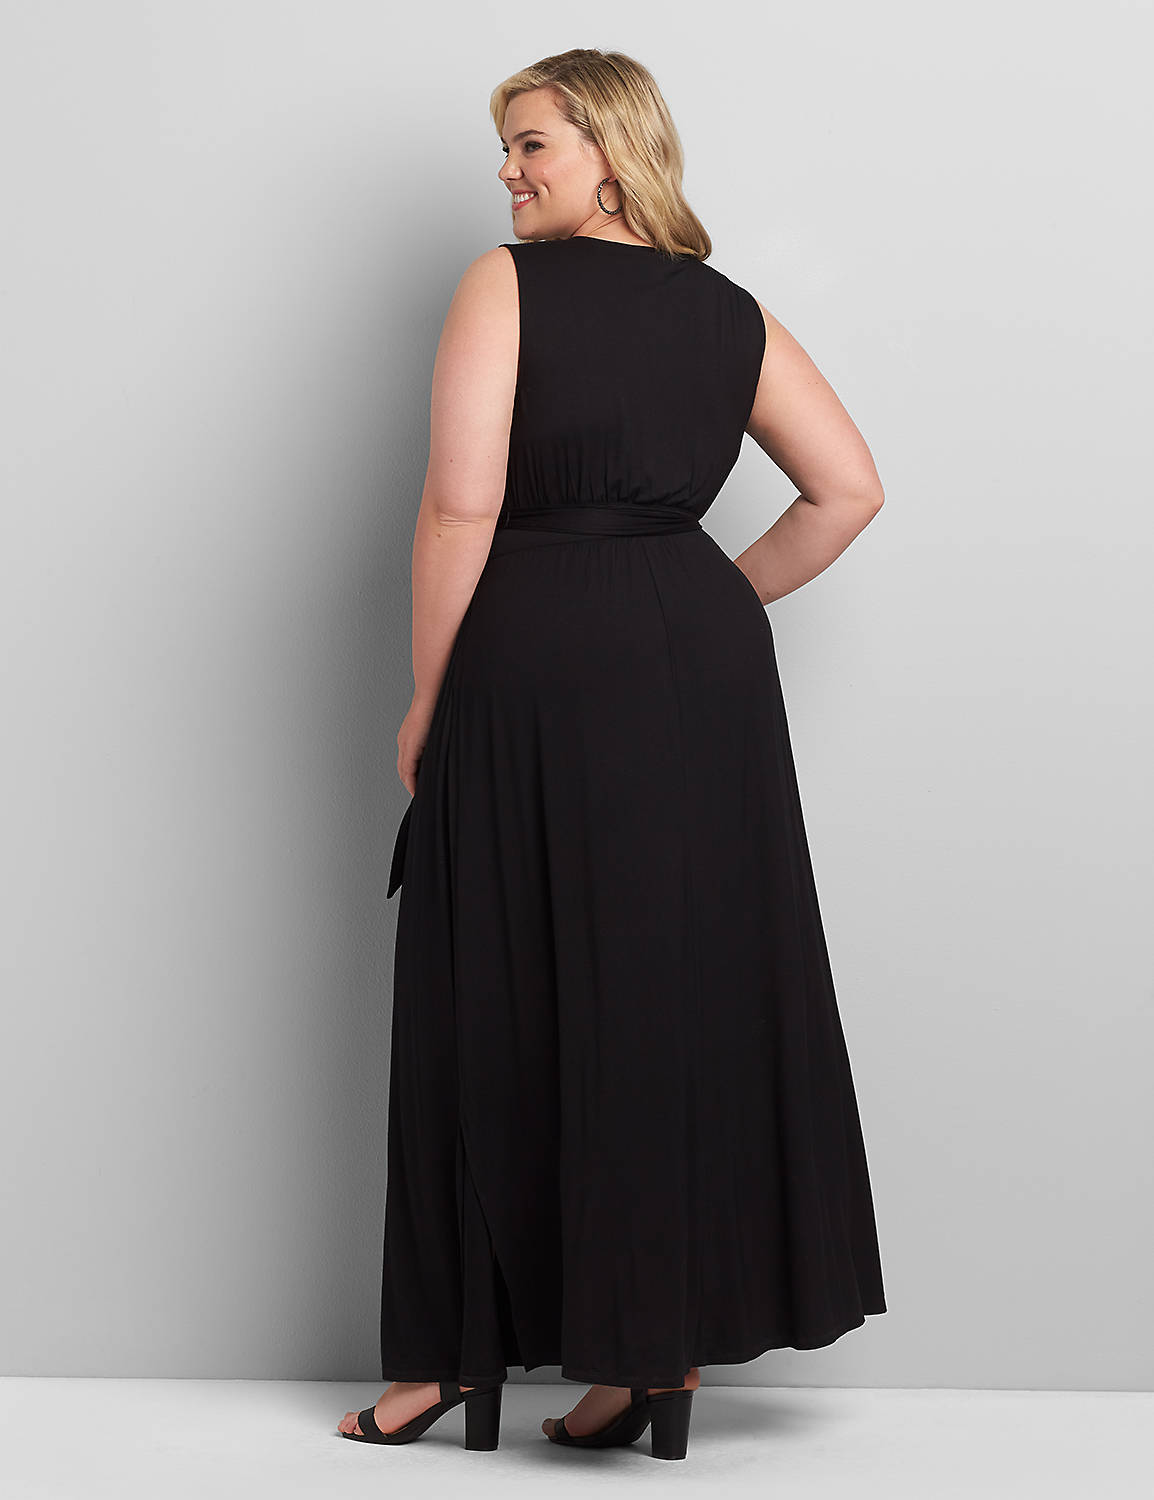 Sleeveless Vneck Maxi Belted Rayon Span Dress 1116752:Pitch Black LB 1000322:18/20 Product Image 2